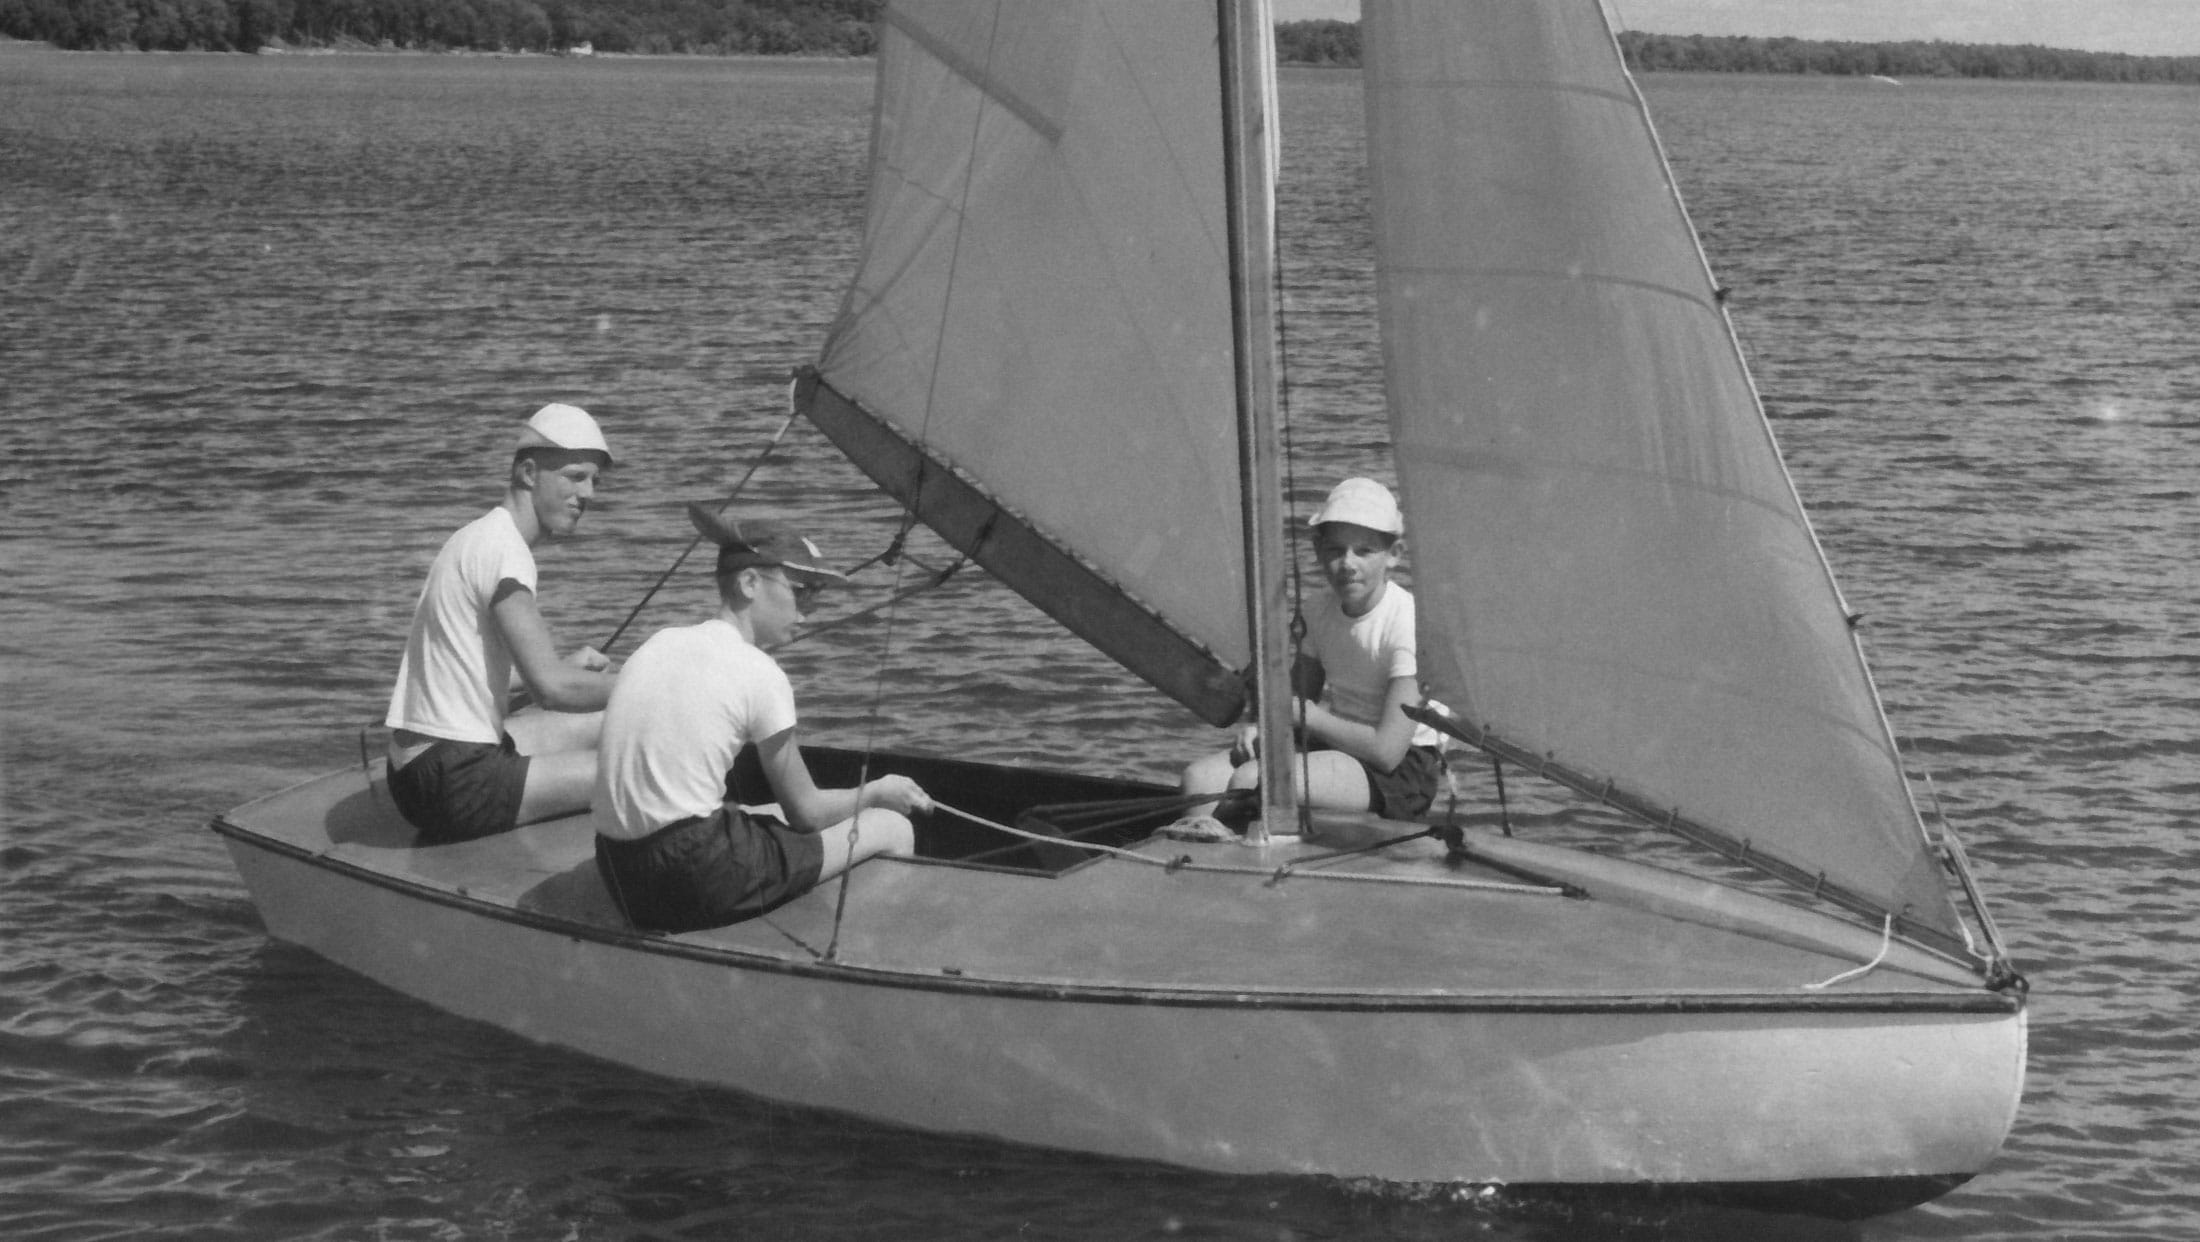 black and white photo of boys on sailboat.